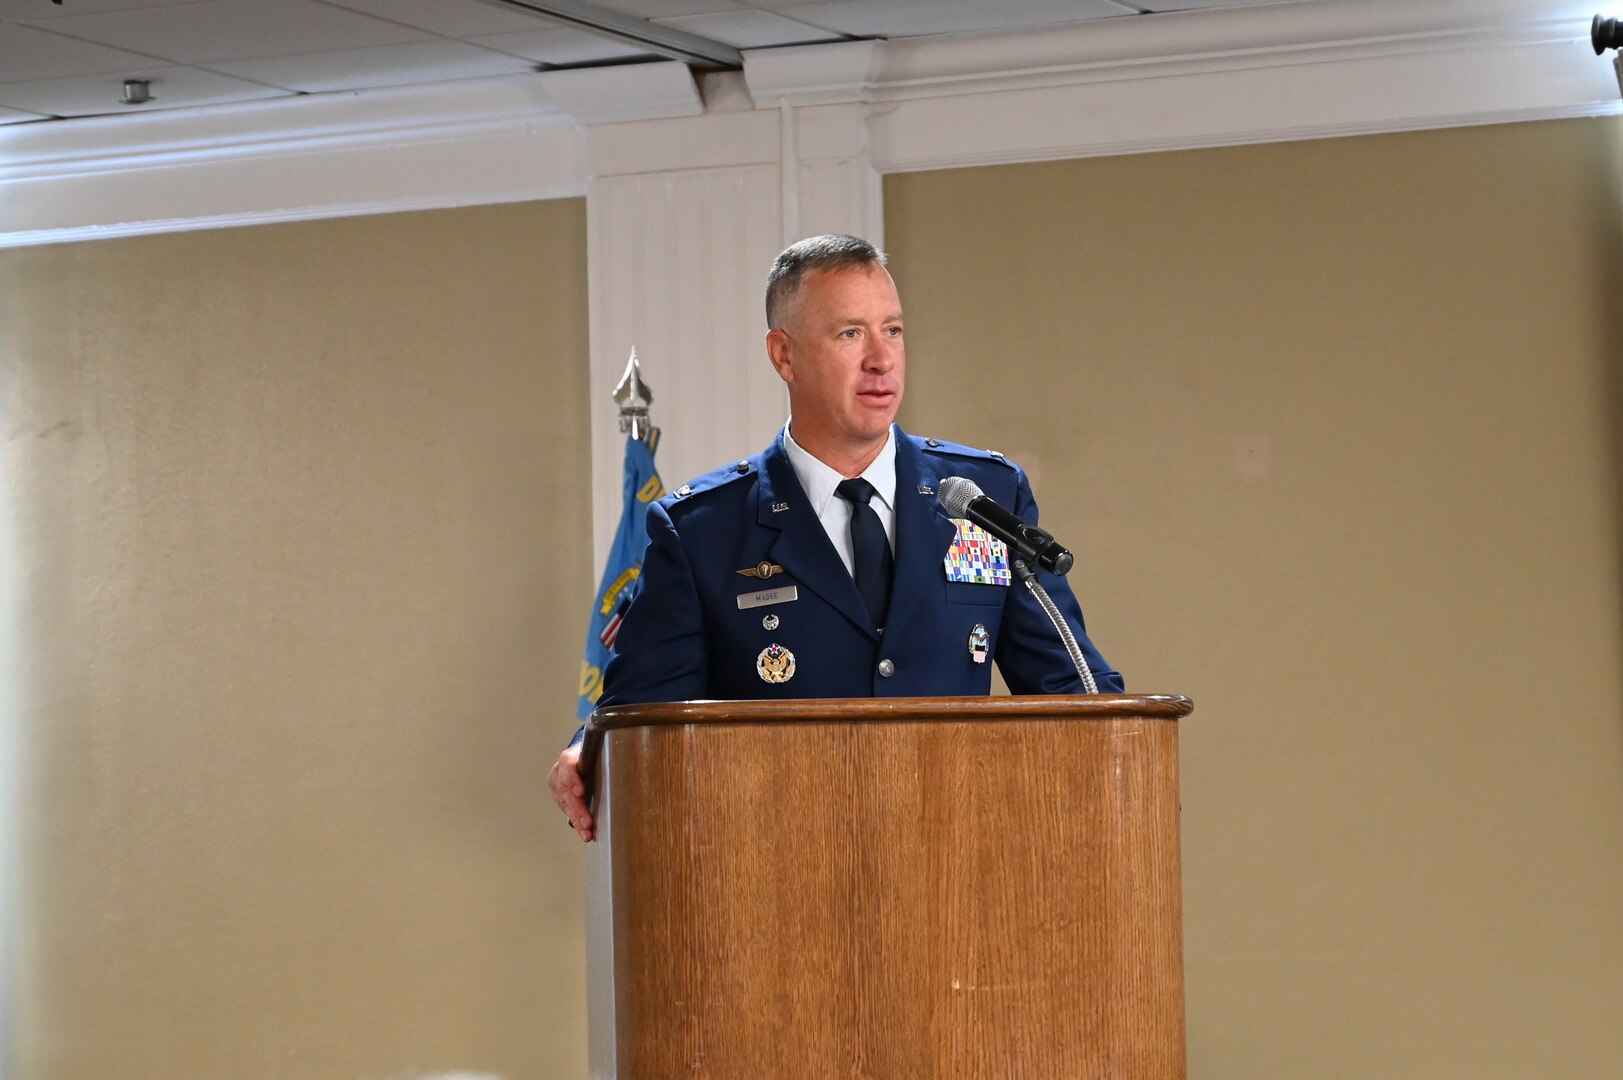 Magee assumes command of DLA at Oklahoma City